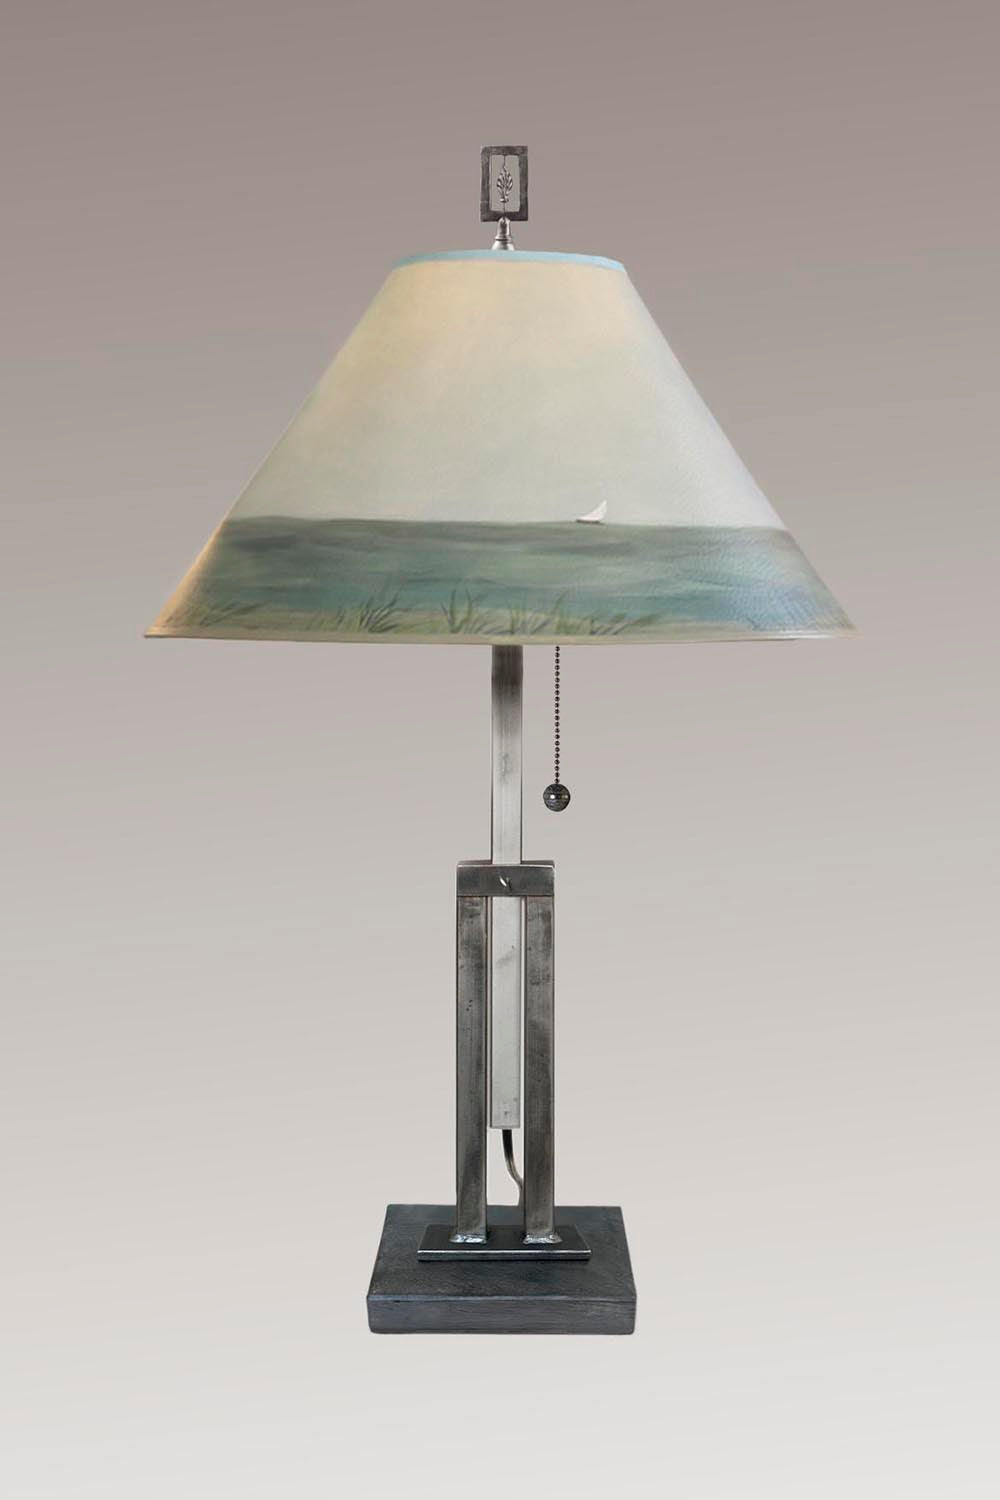 Adjustable-Height Steel Table Lamp with Large Conical Shade in Shore